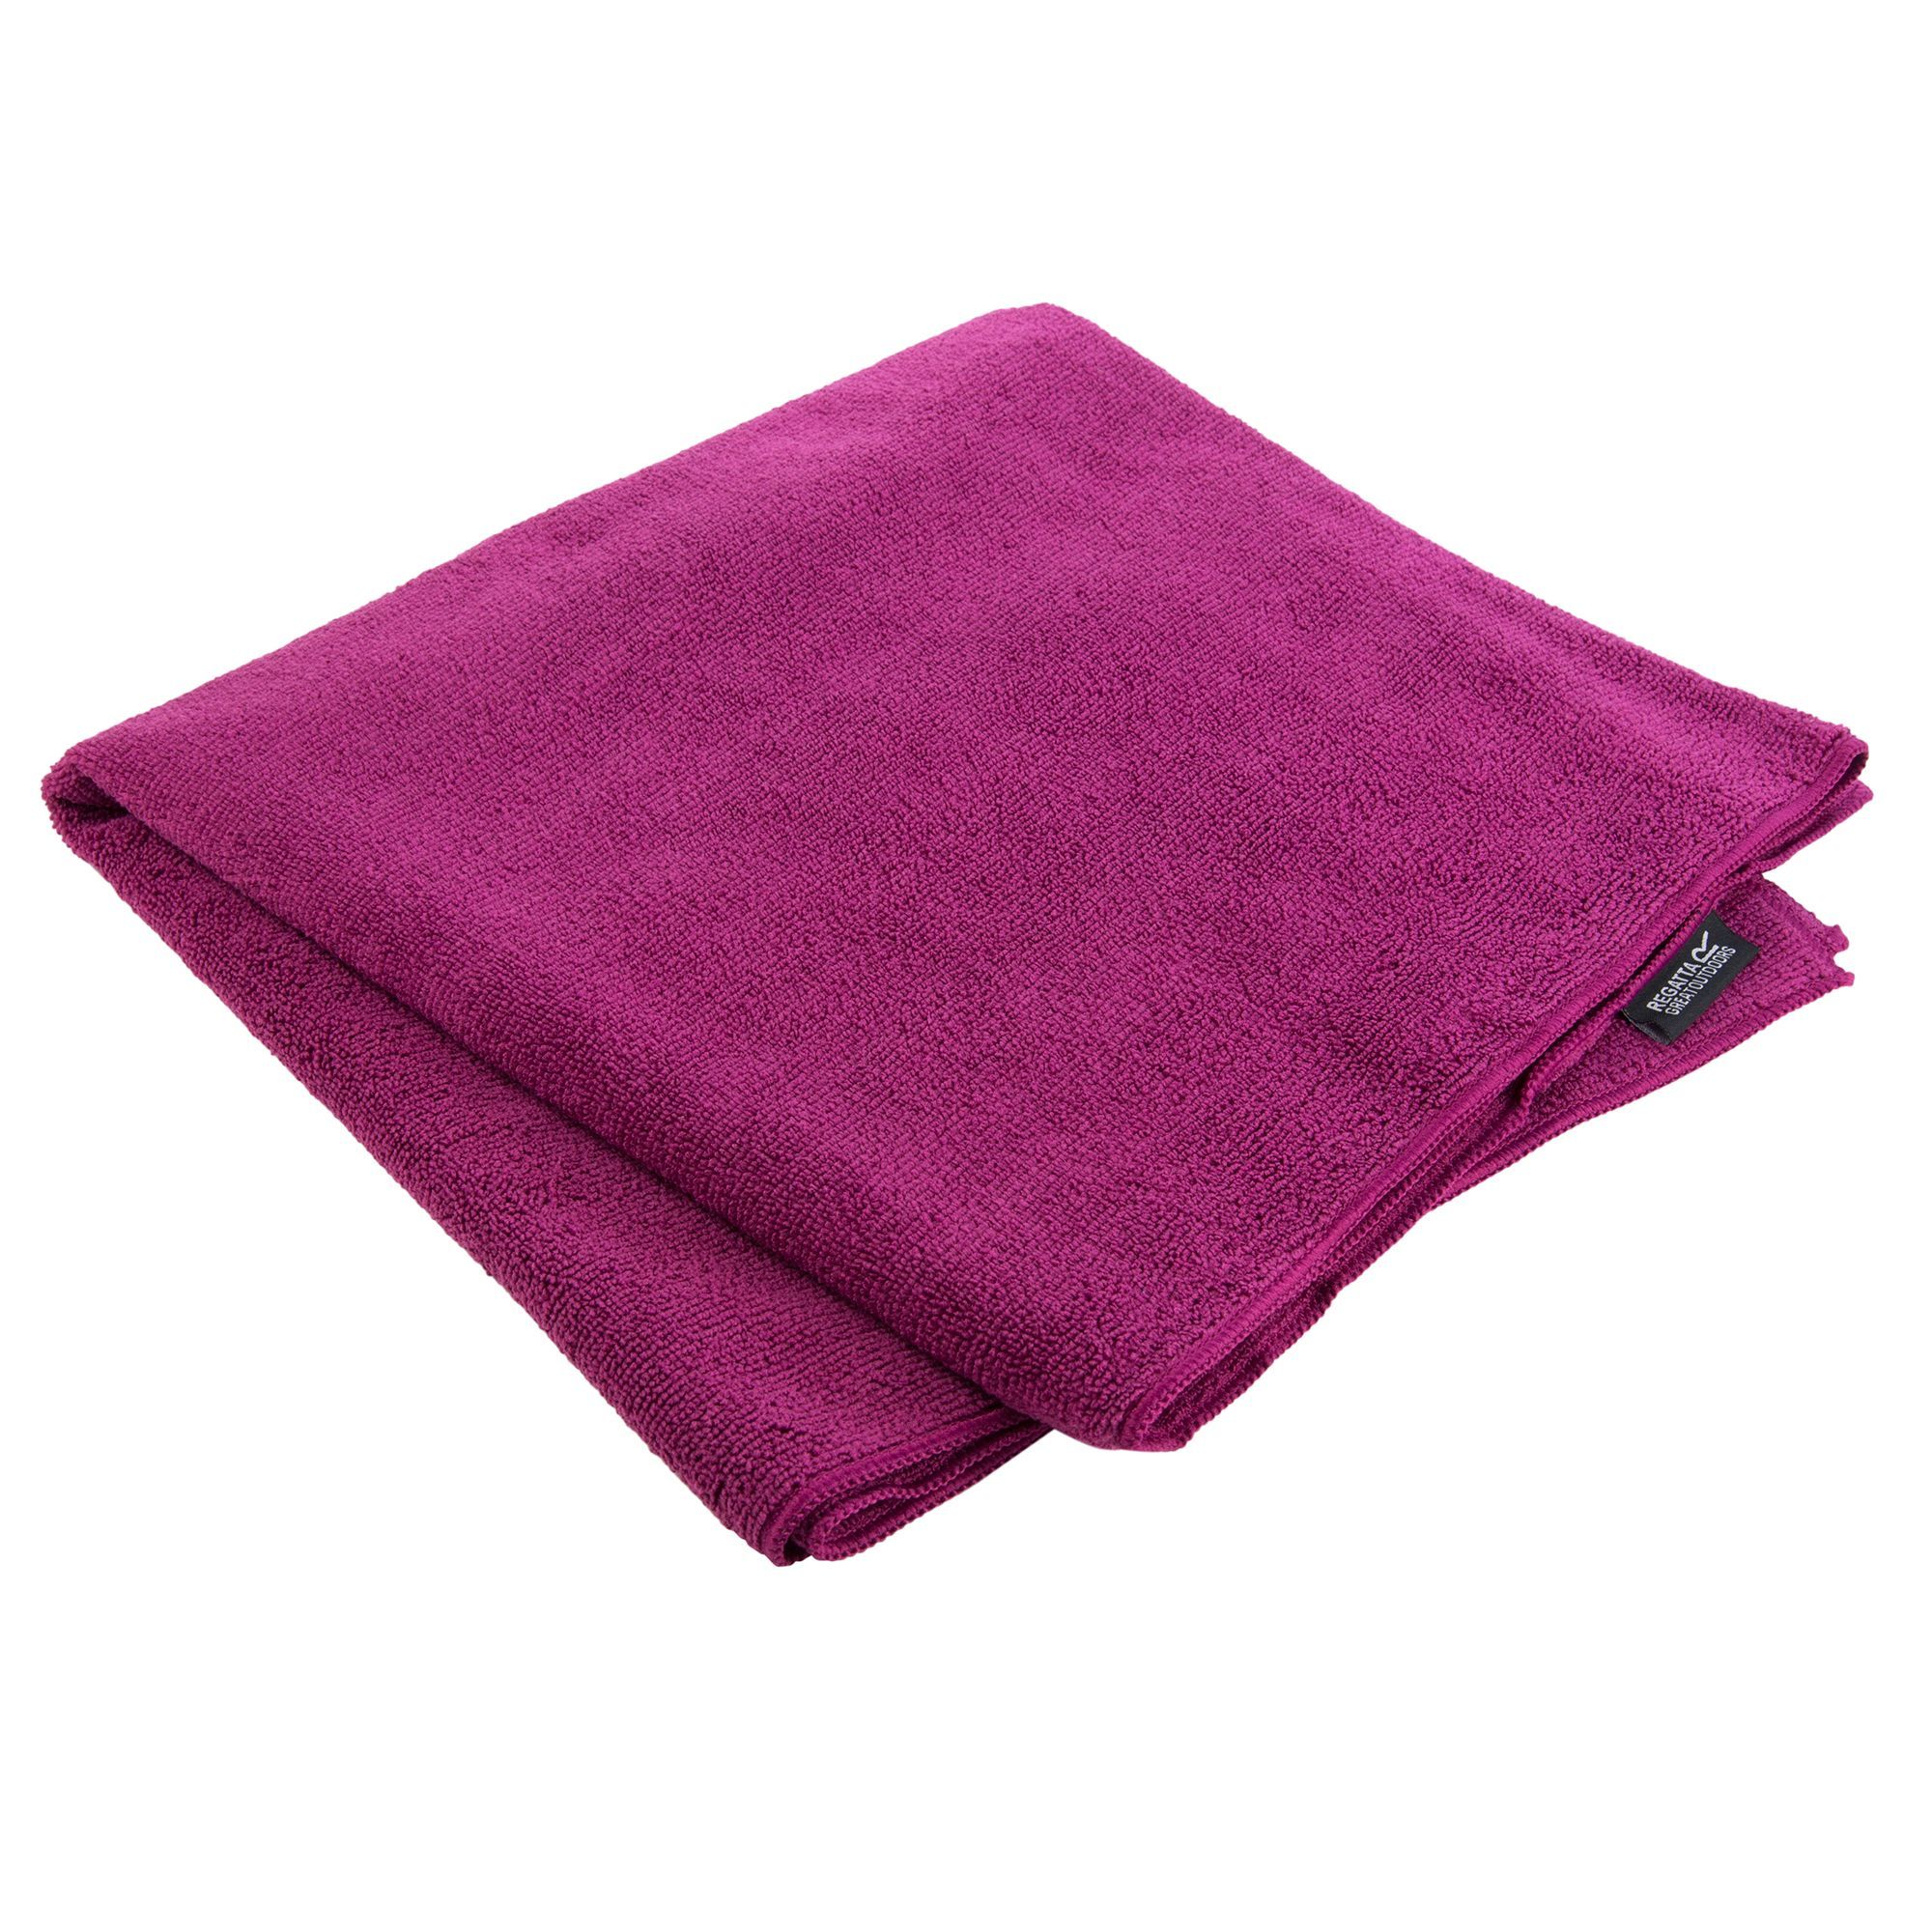 80% Polyester, 20% Polyamide. Lightweight and compact. Dries 4x quicker than a standard towel. Treated with  formula. 135 x 70cm. Includes storage bag.